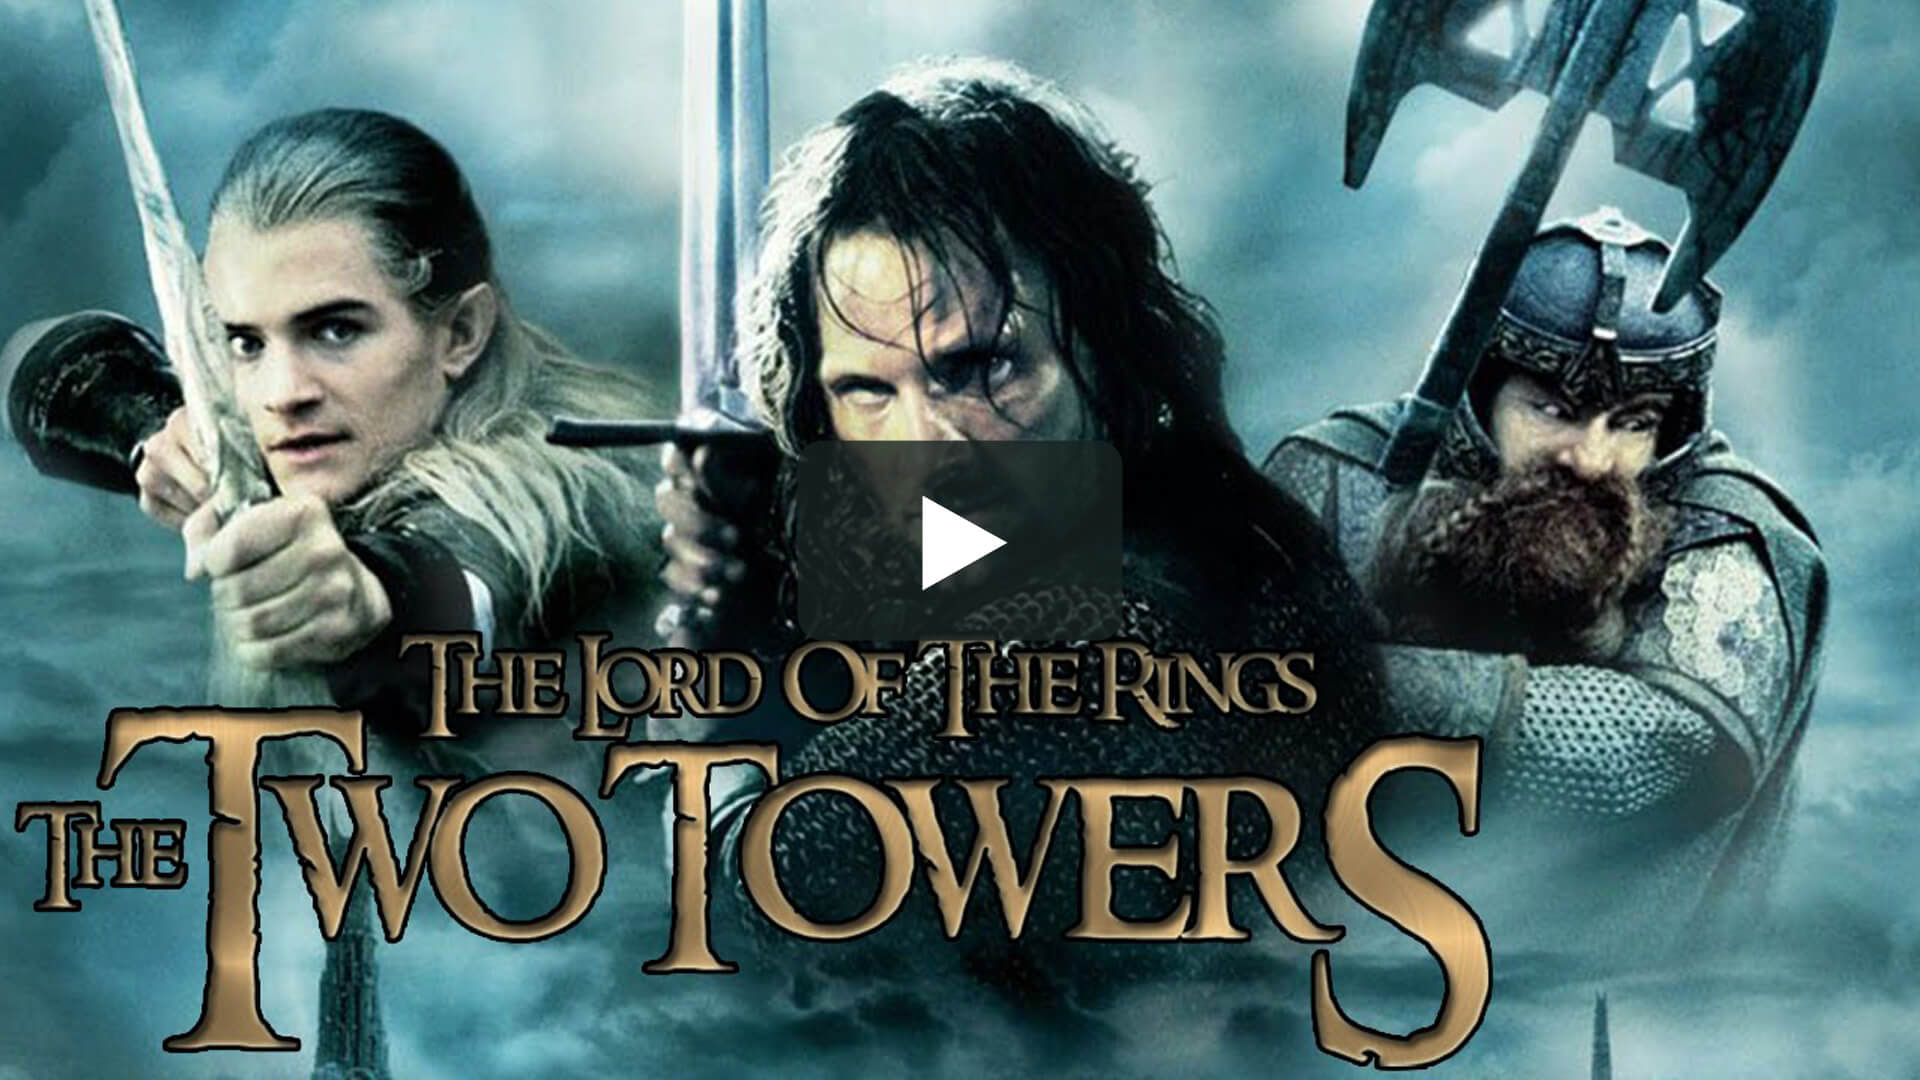 The Lord of the Rings: The Two Towers - 指環王2：雙塔奇兵